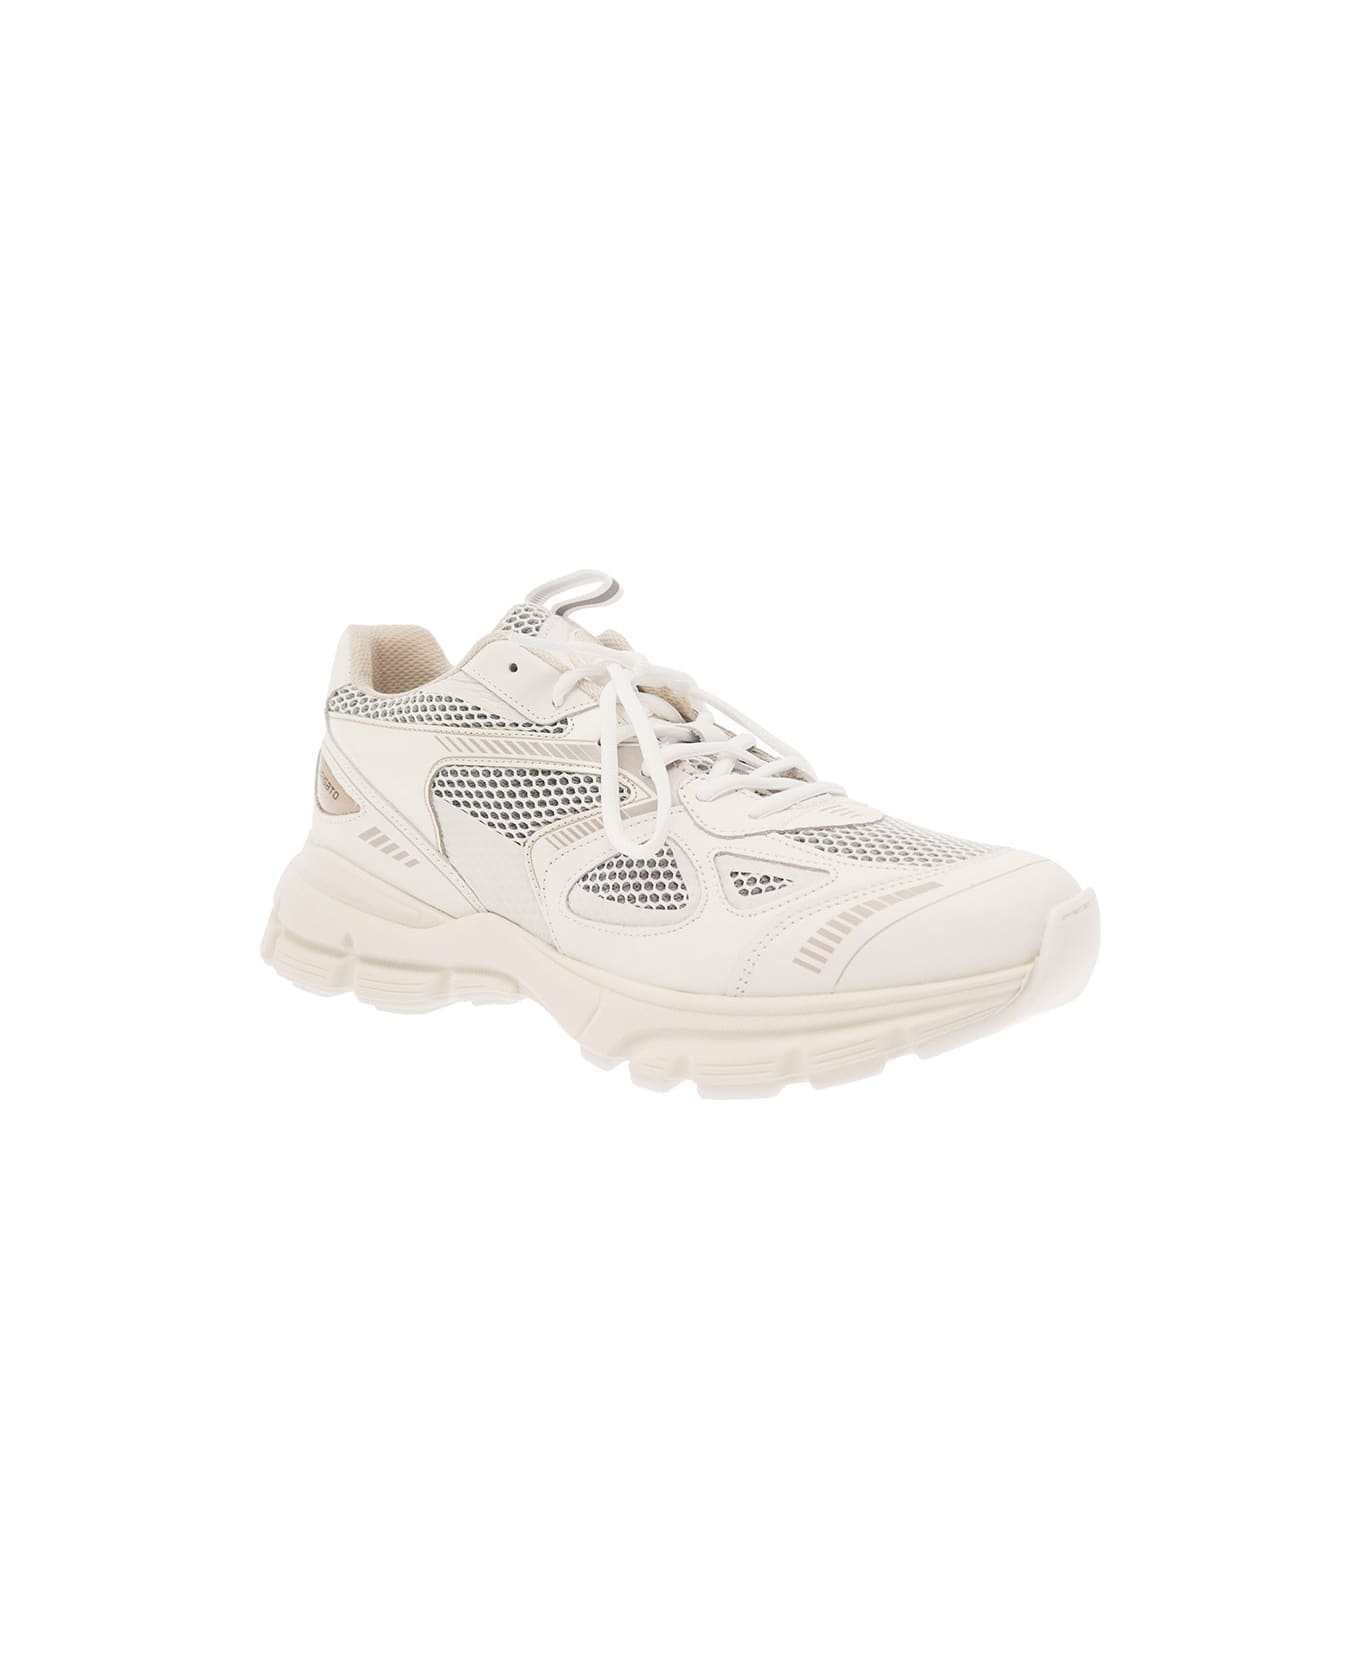 Axel Arigato 'marathon Runner' White Low Top Sneakers With Reflective Details In Leather Blend Man - White